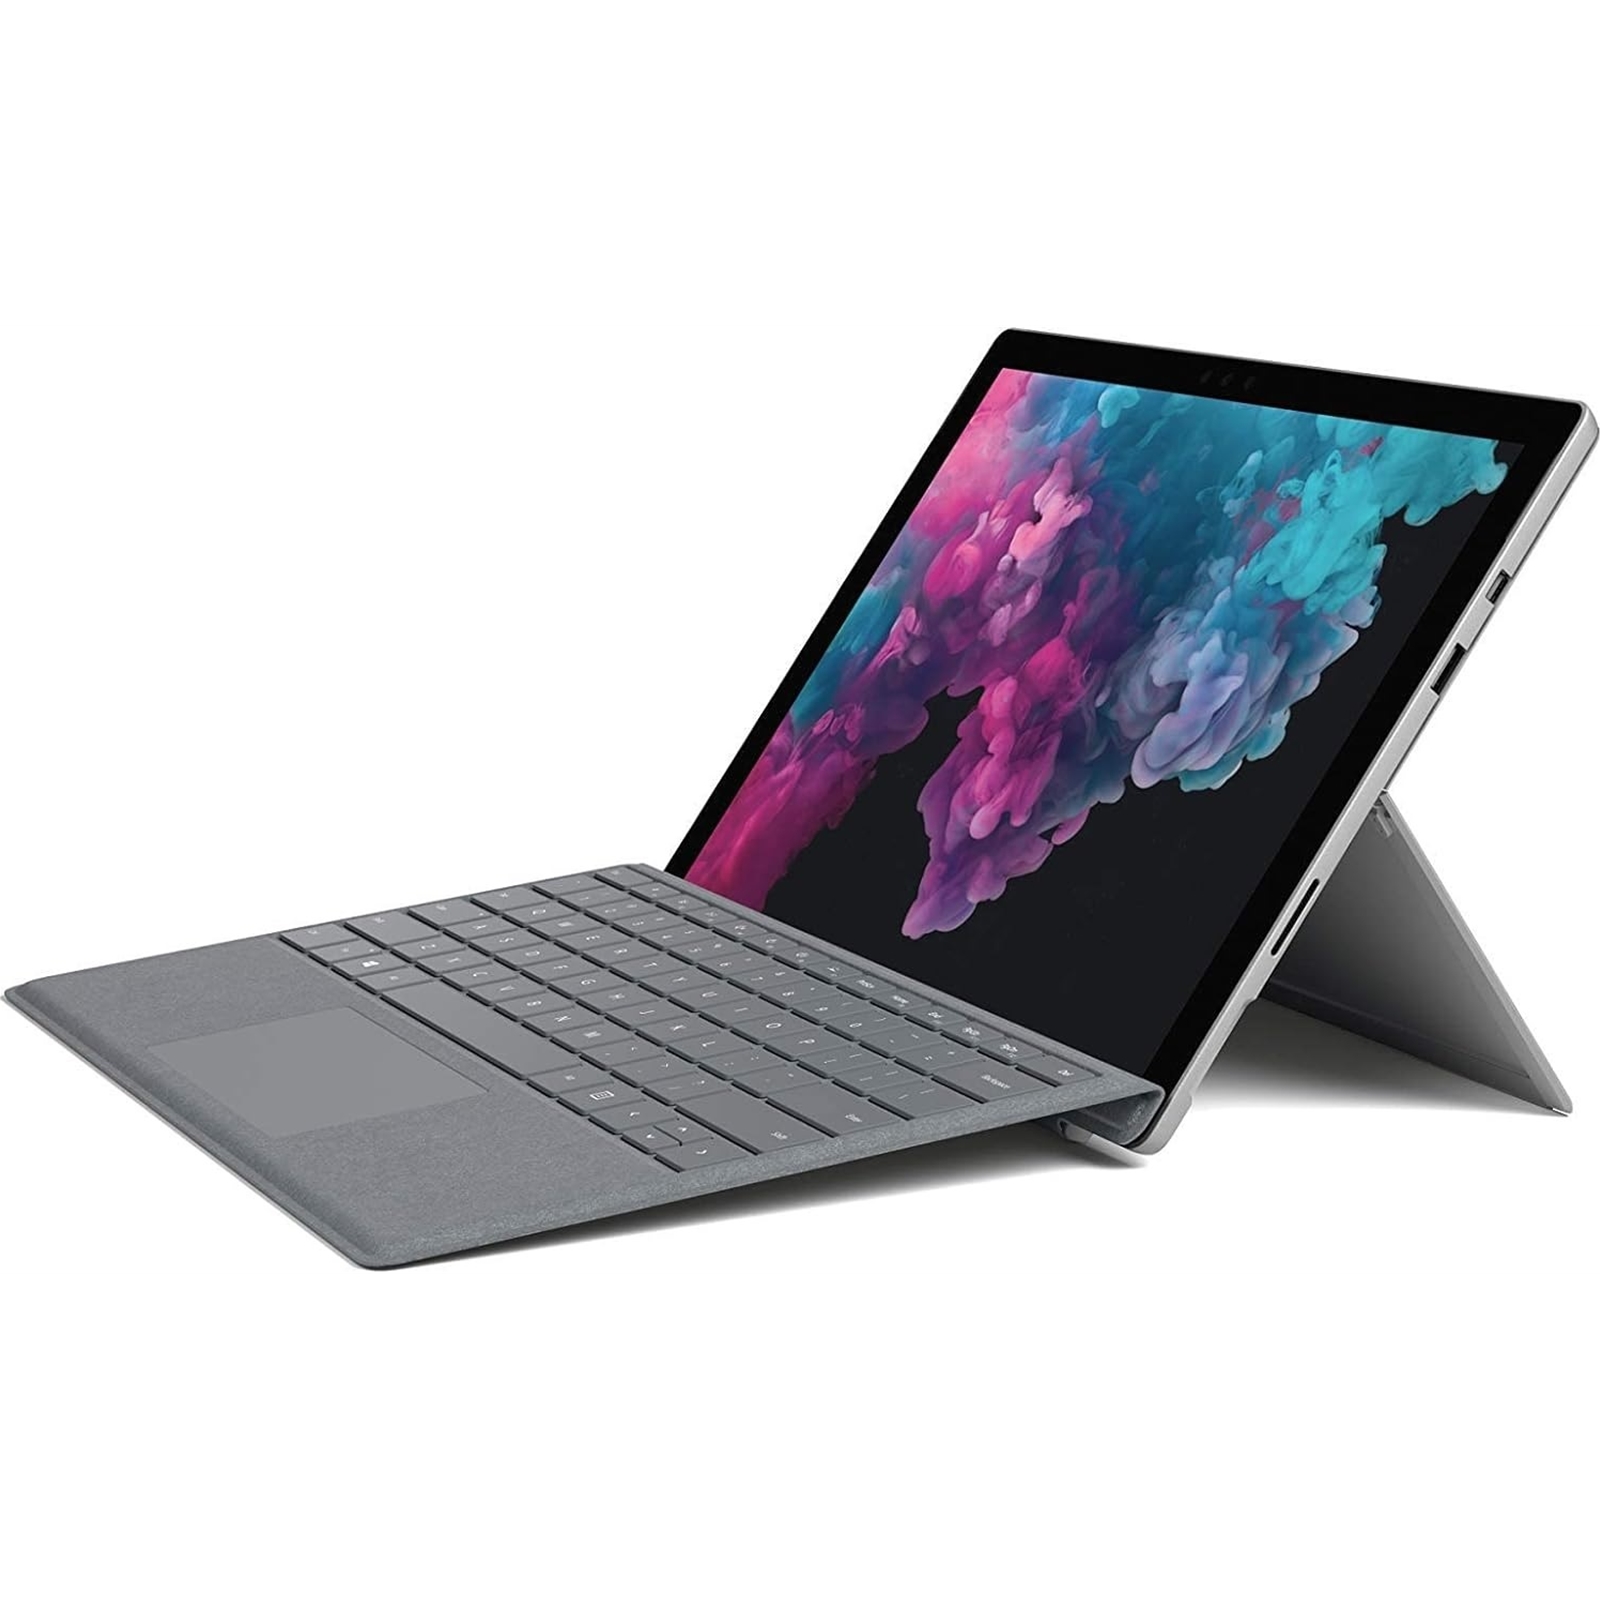 Microsoft Surface Pro 6 Tablet with Keyboard, Grade A Refurb, 12.3 Inc